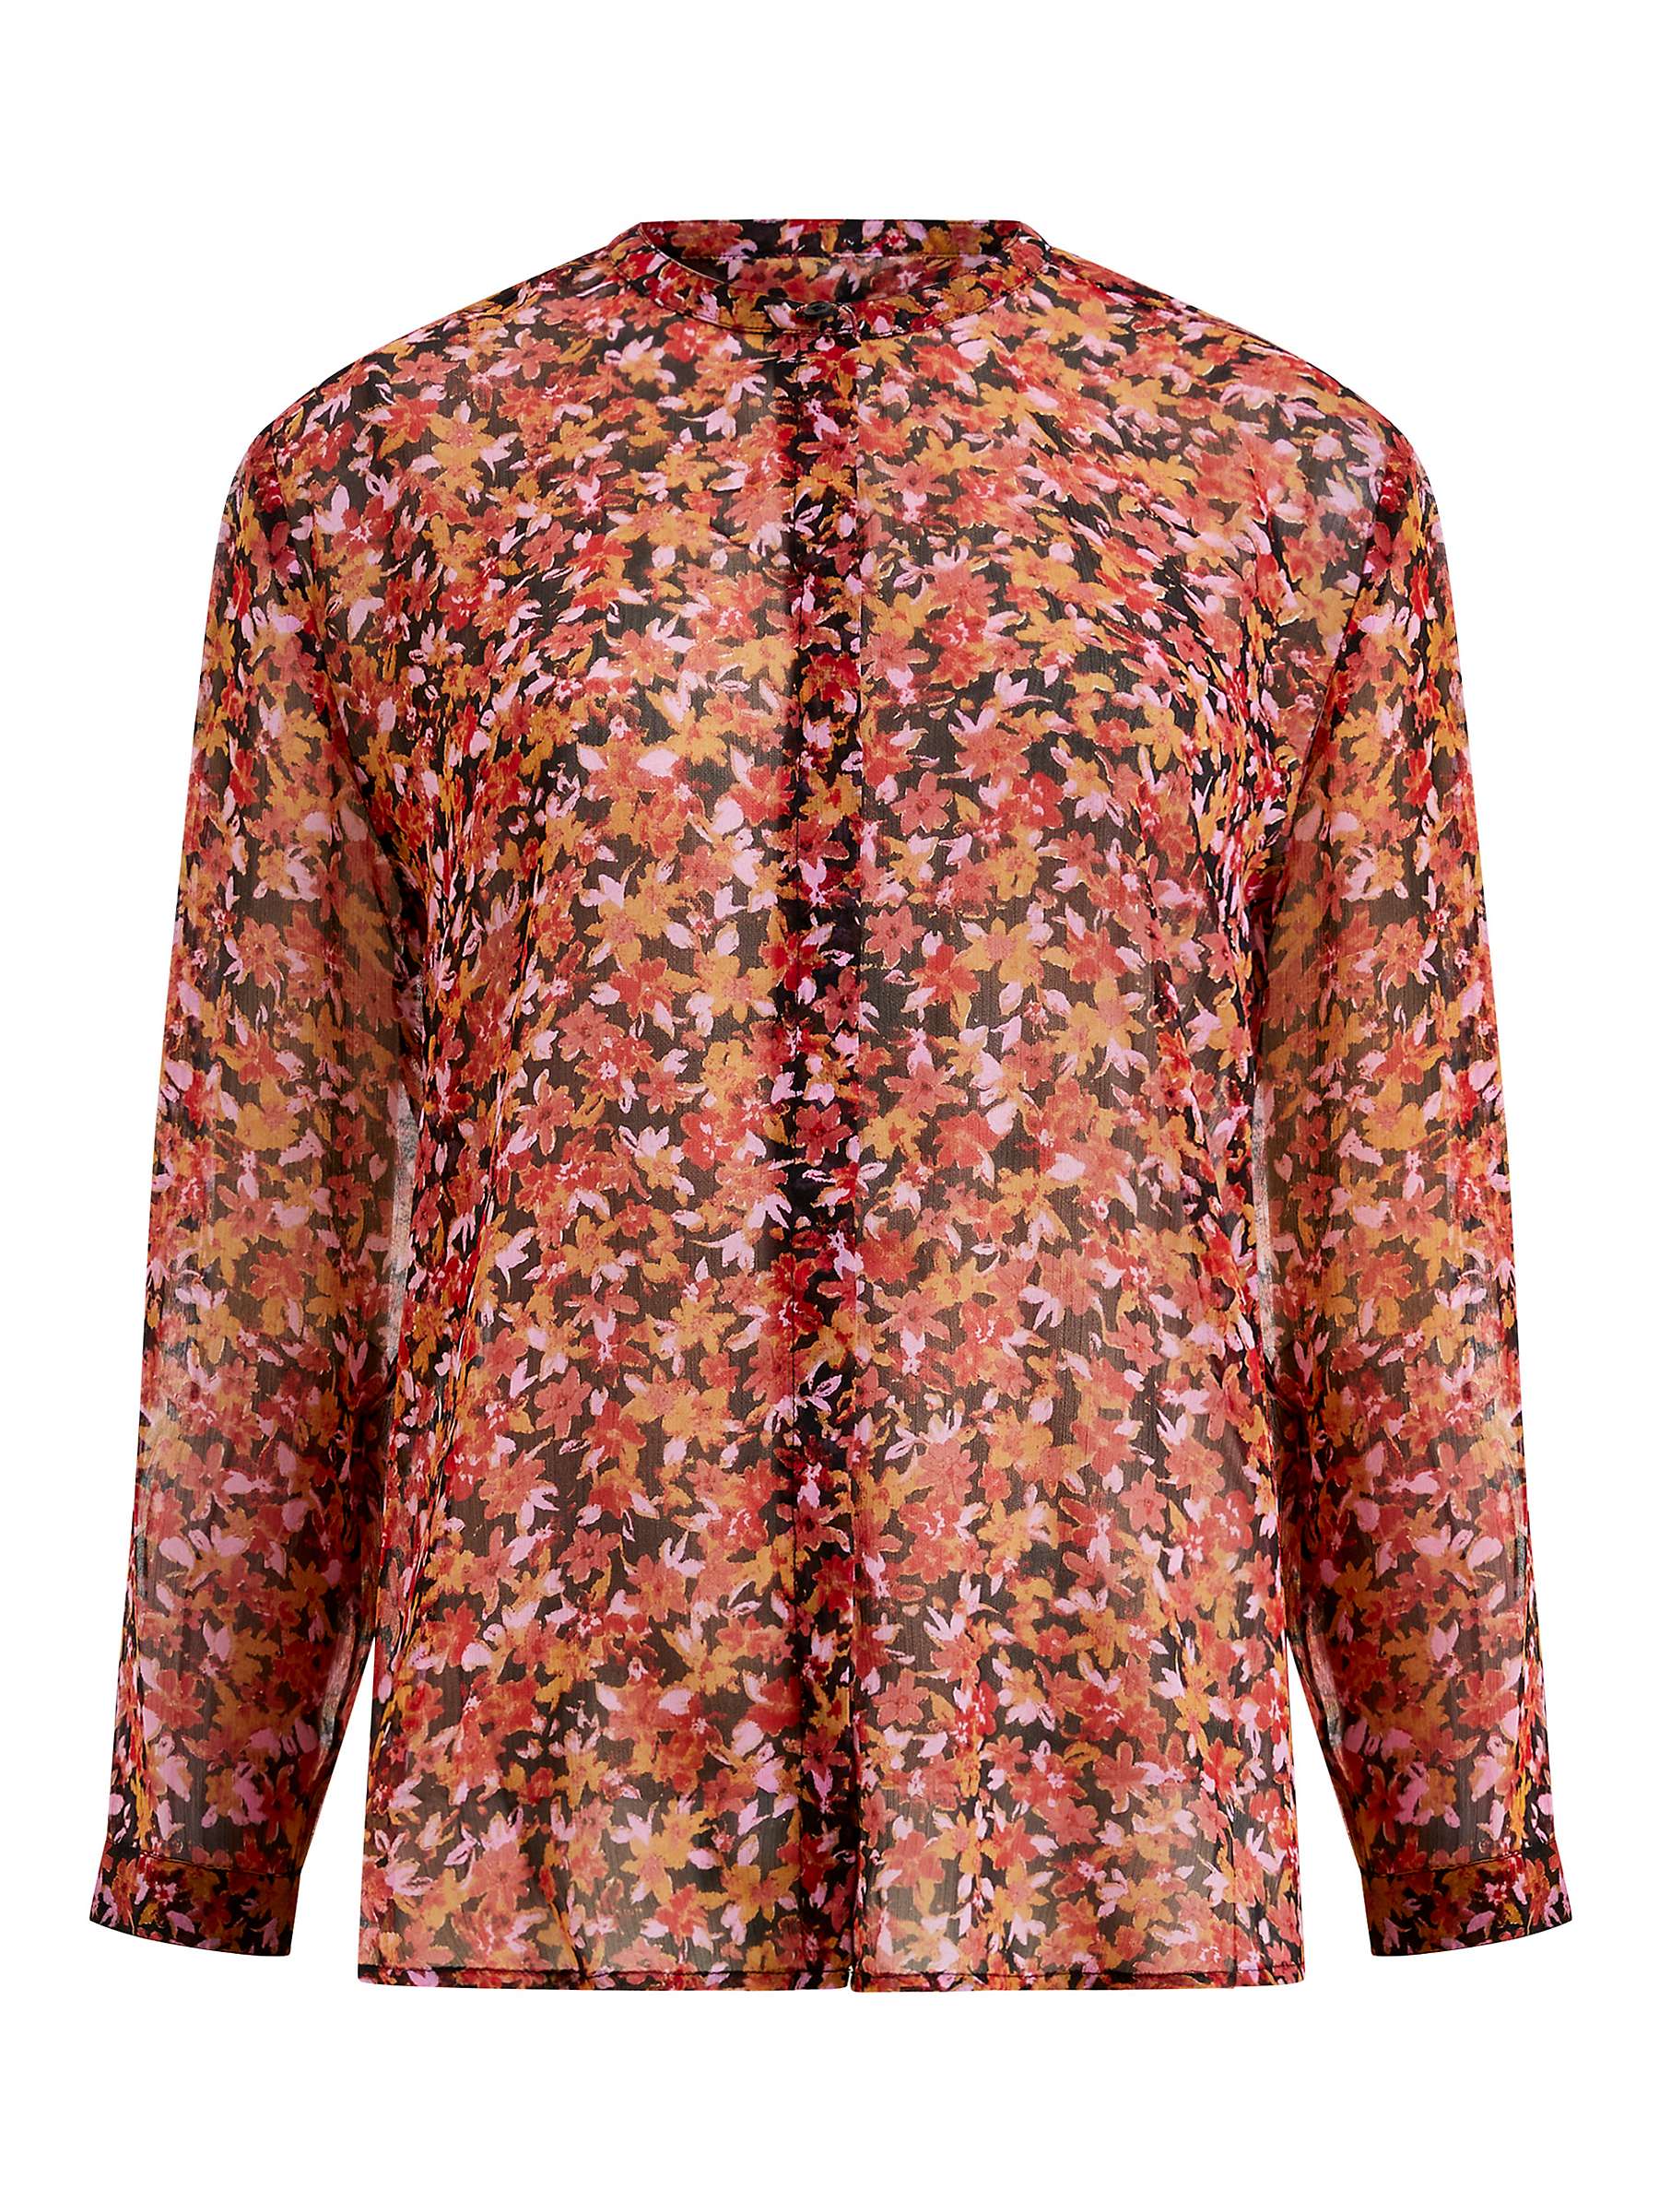 Buy French Connection Clara Flavia Grandad Shirt, Multi Online at johnlewis.com